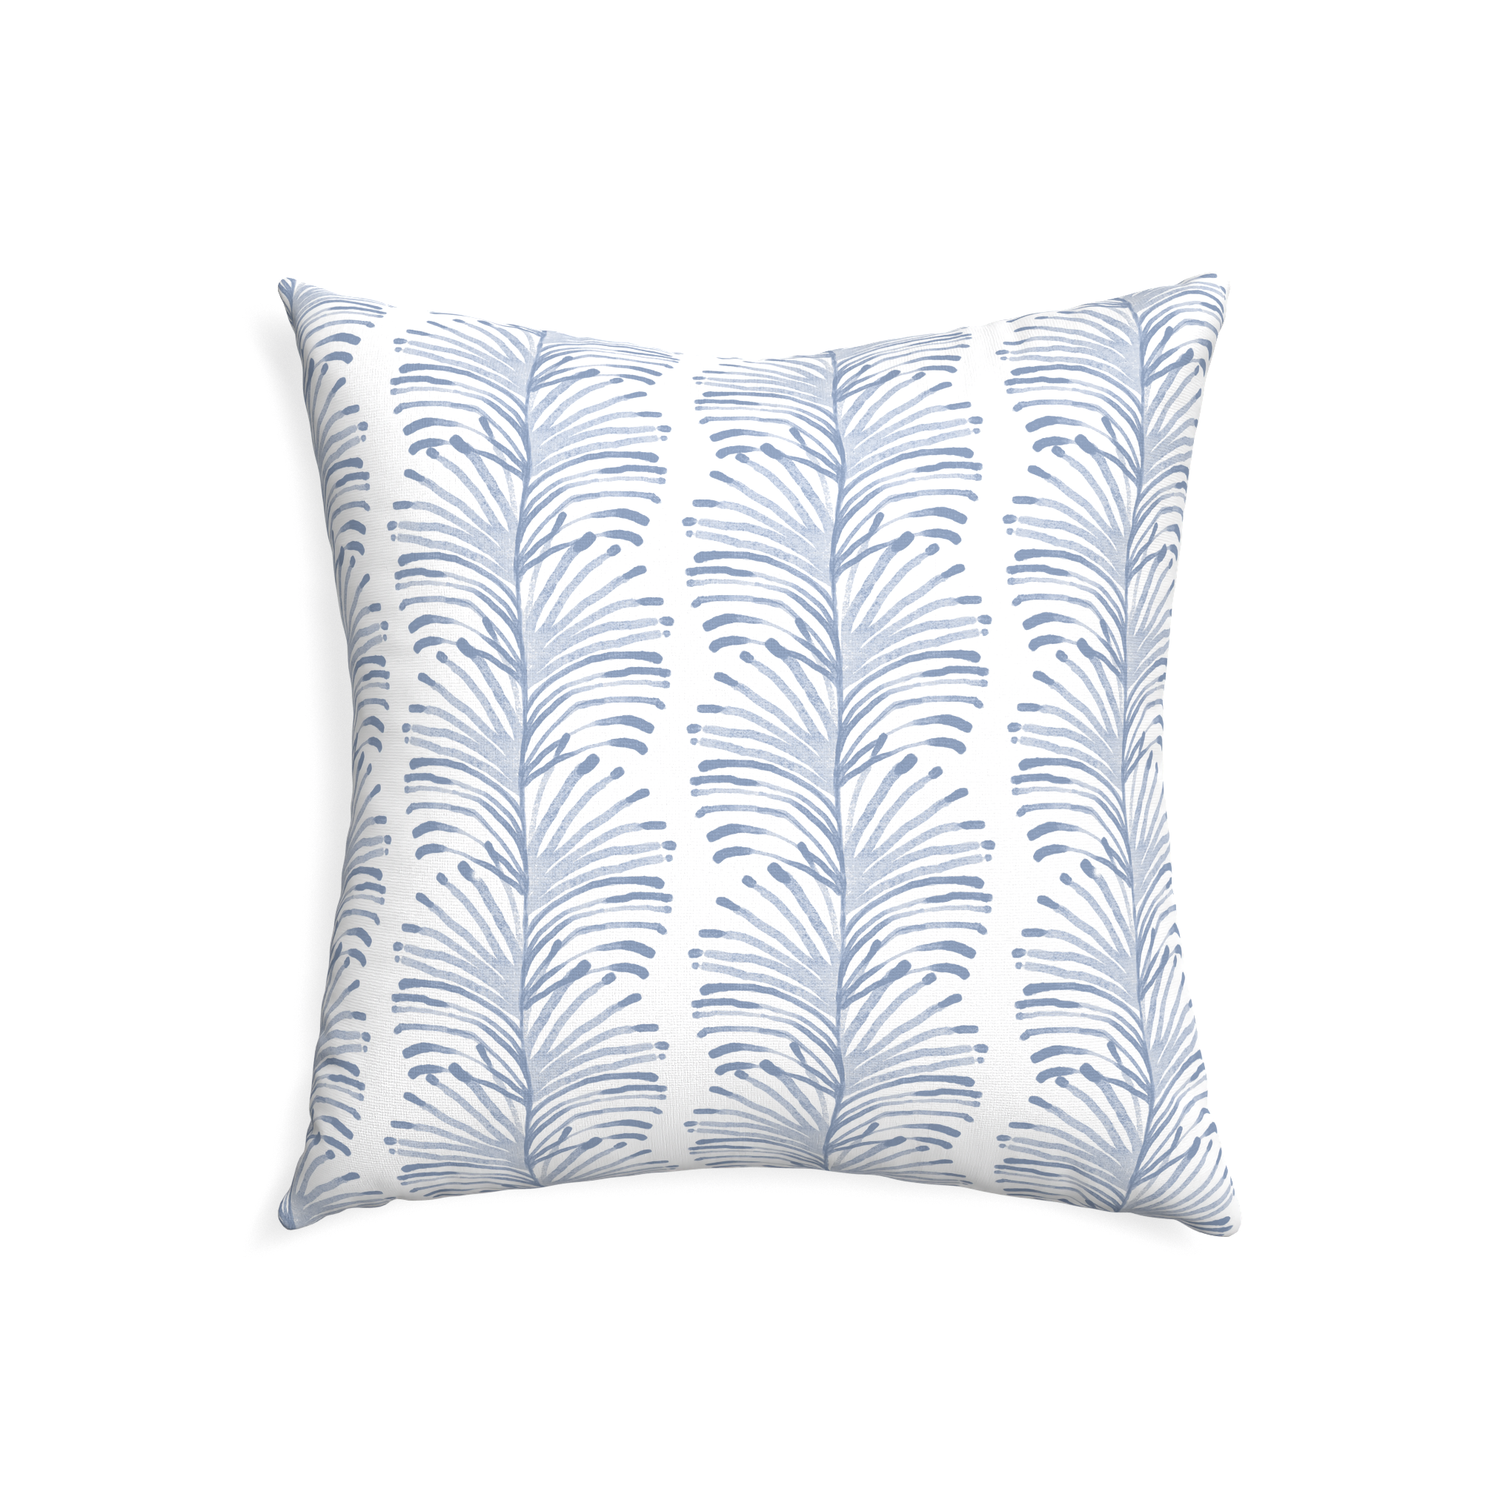 22-square emma sky custom sky blue botanical stripepillow with none on white background